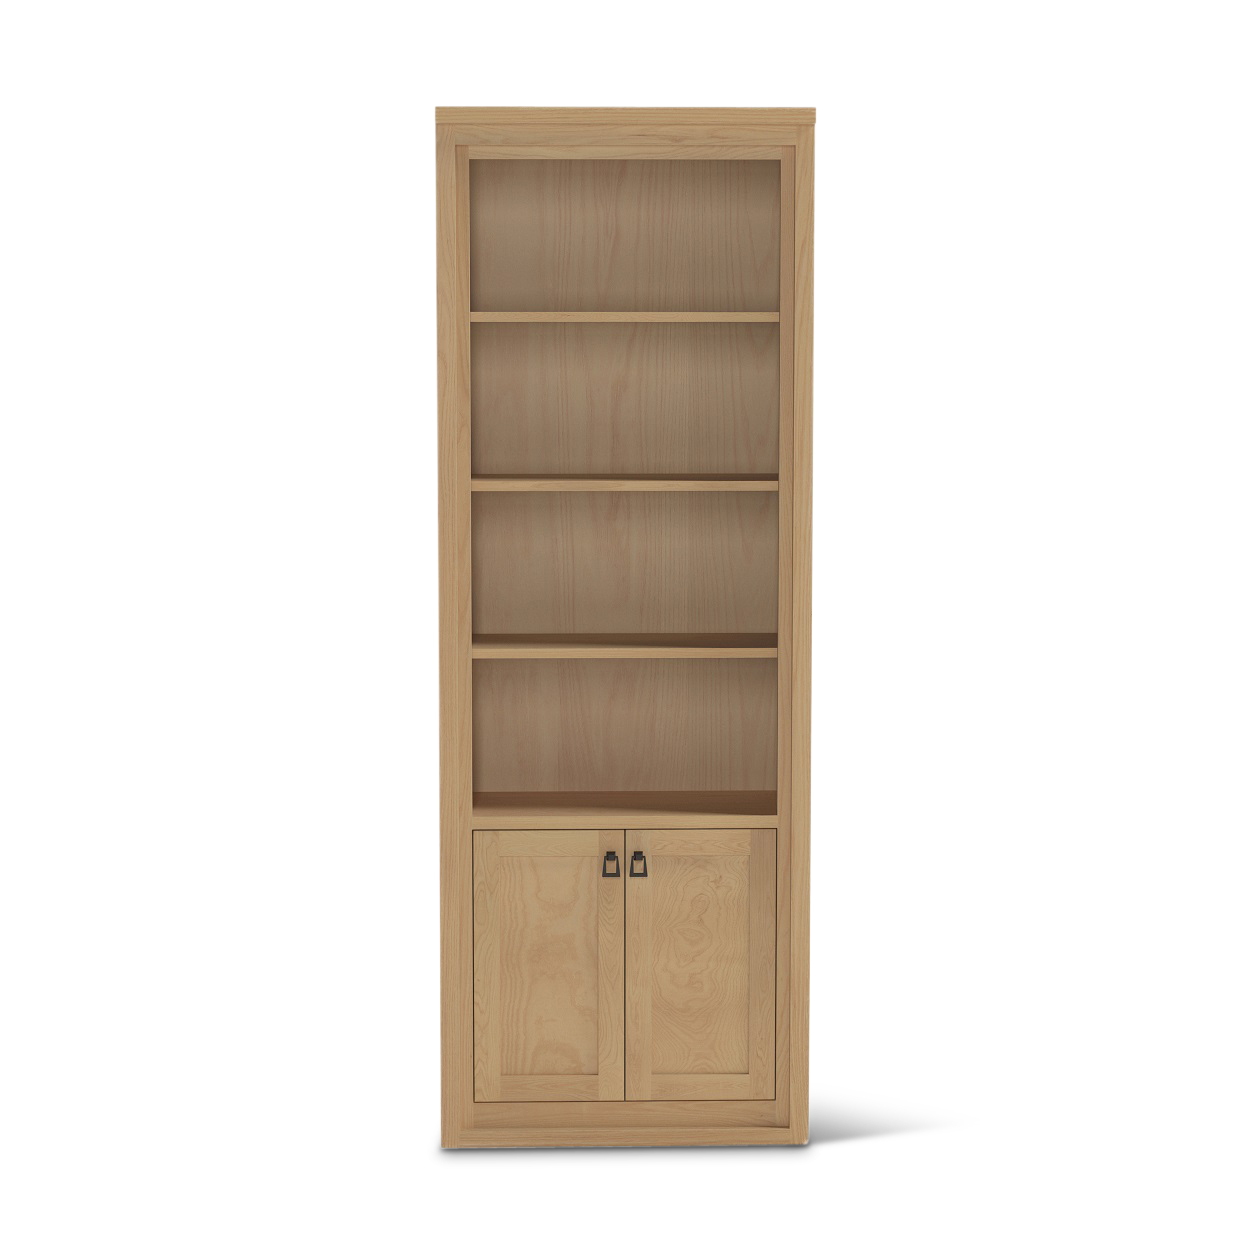 Tall bookshelf with solid wood trim and a bookcase with two doors